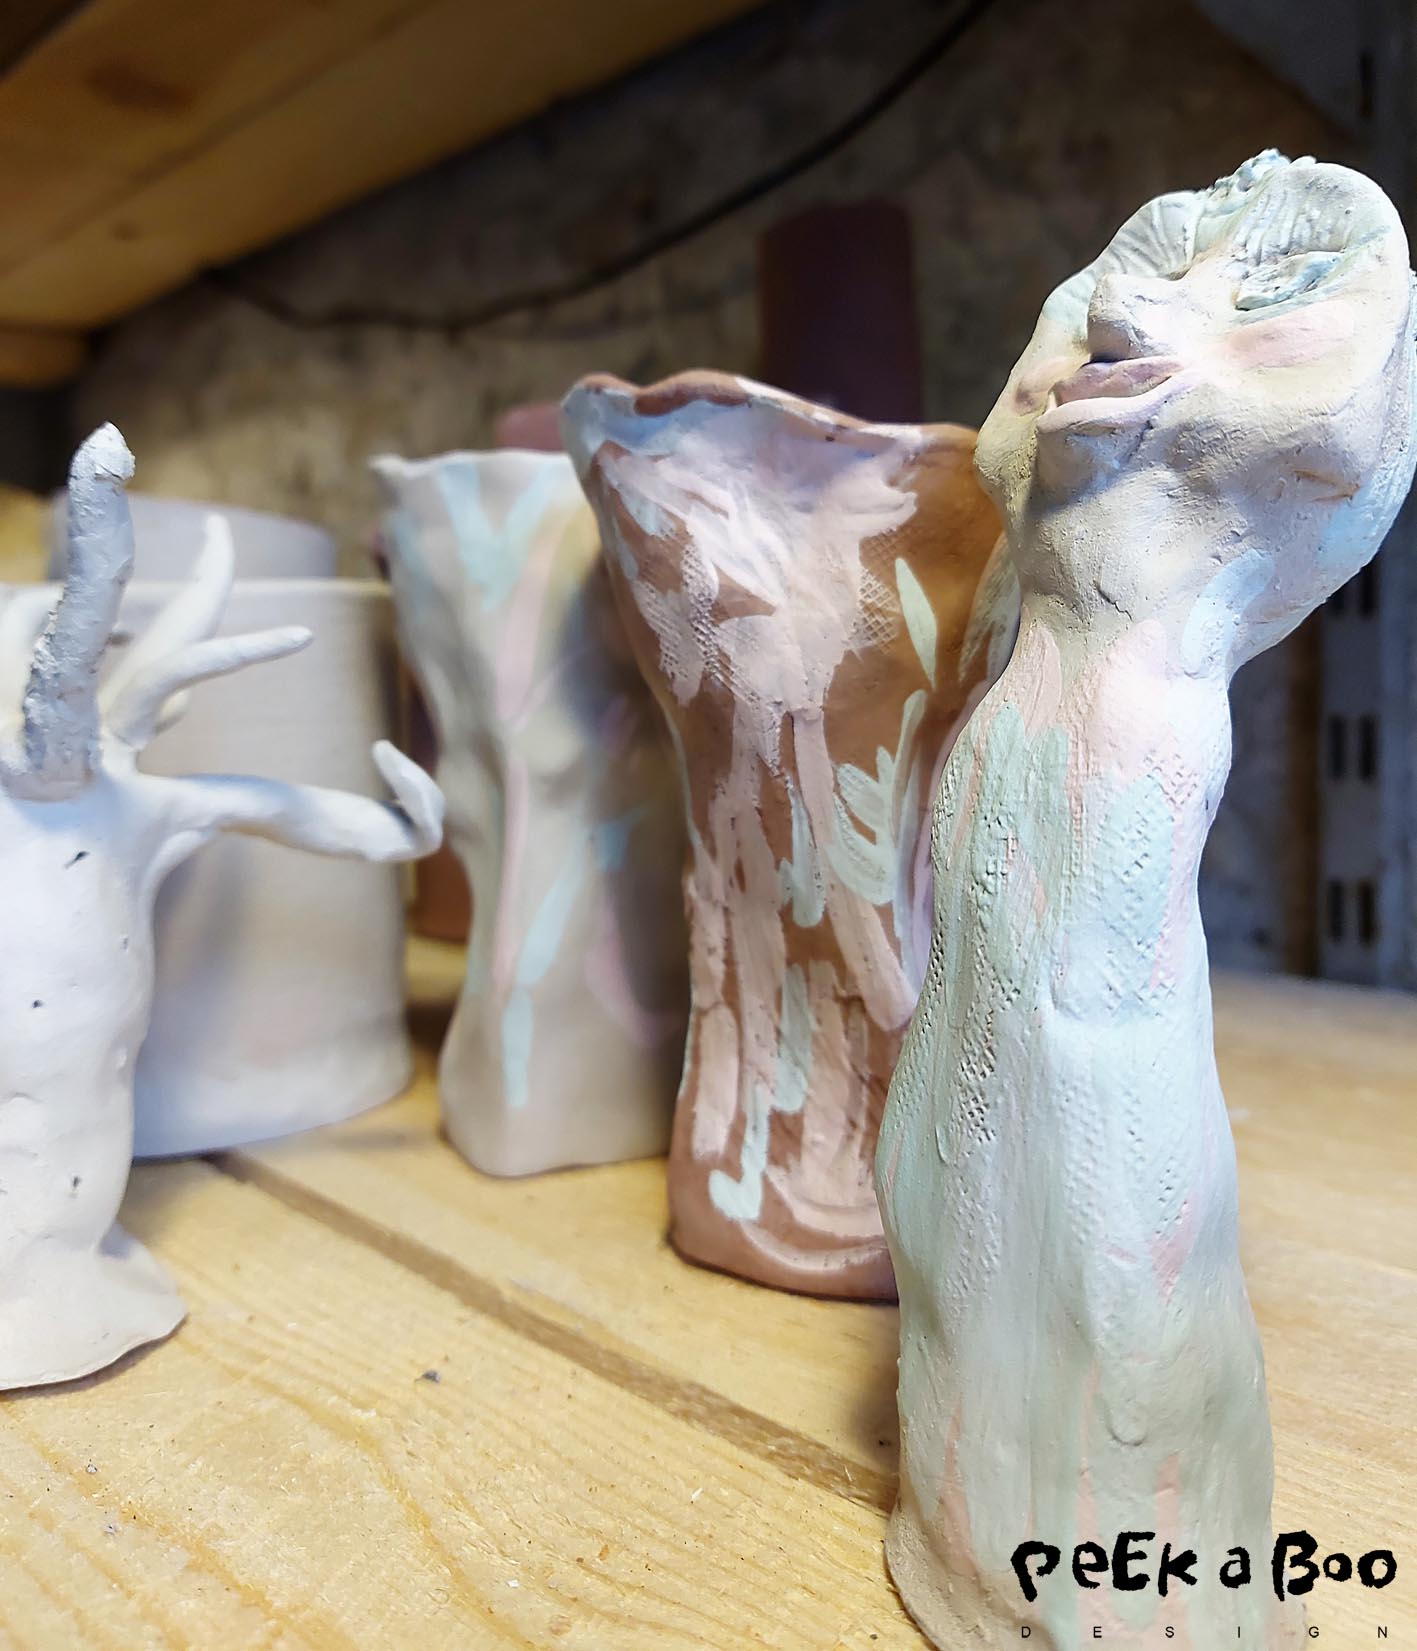 Some of the works from costumers that was waiting to be glazed or collected.